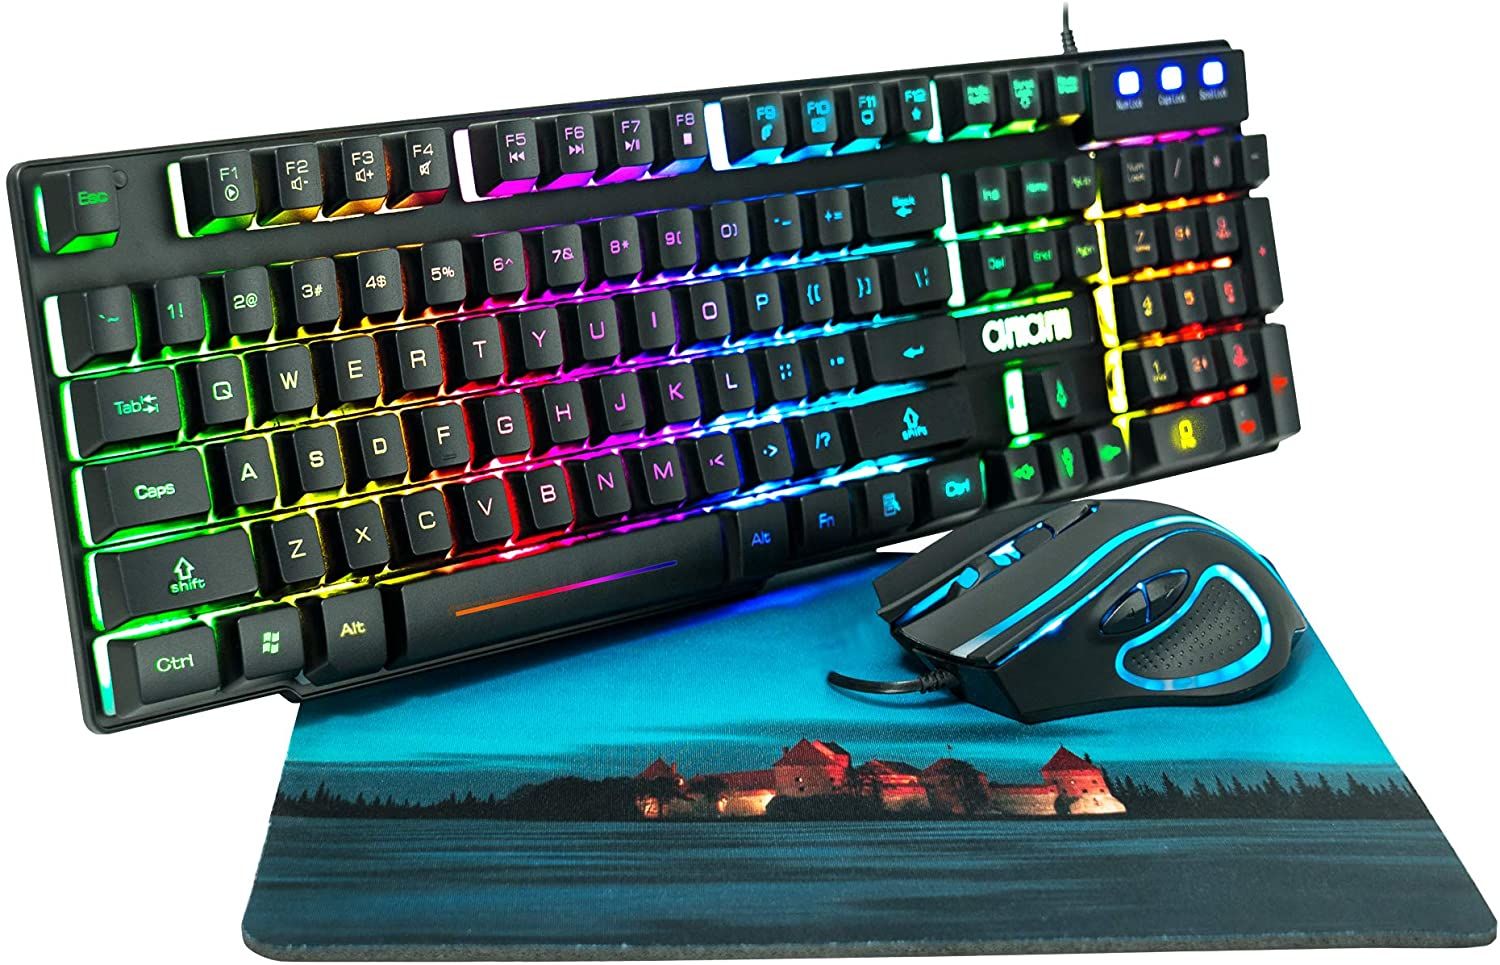 CONCHOW RGB Gaming Keyboard and Mouse Combo